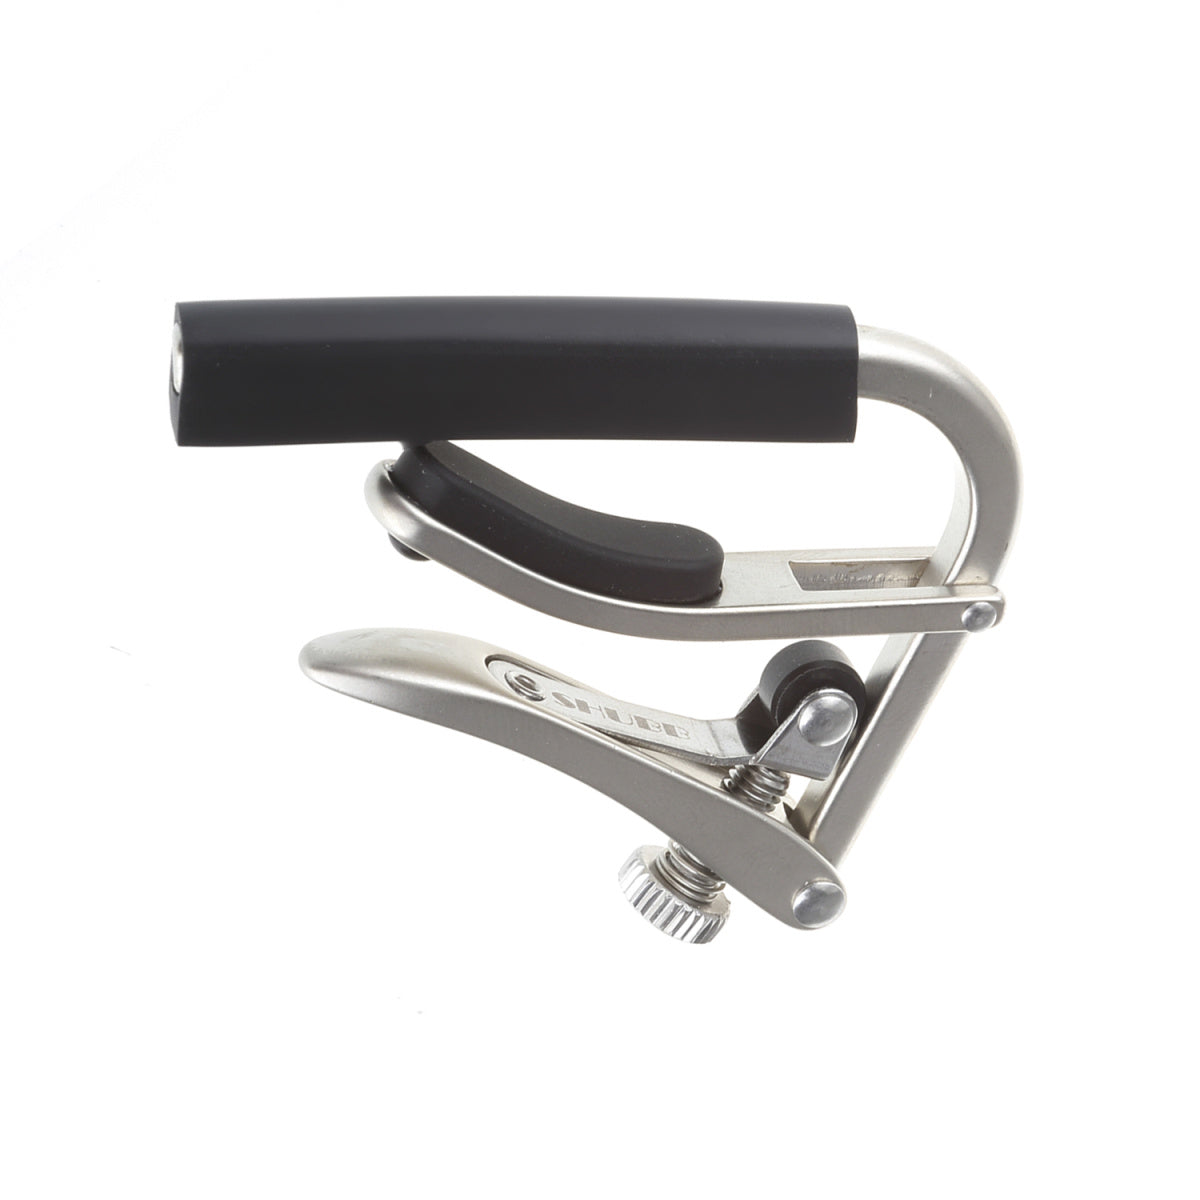 Shubb C1n Capo for Acoustics and Electrics Steel String Guitar,  Brushed Nickel